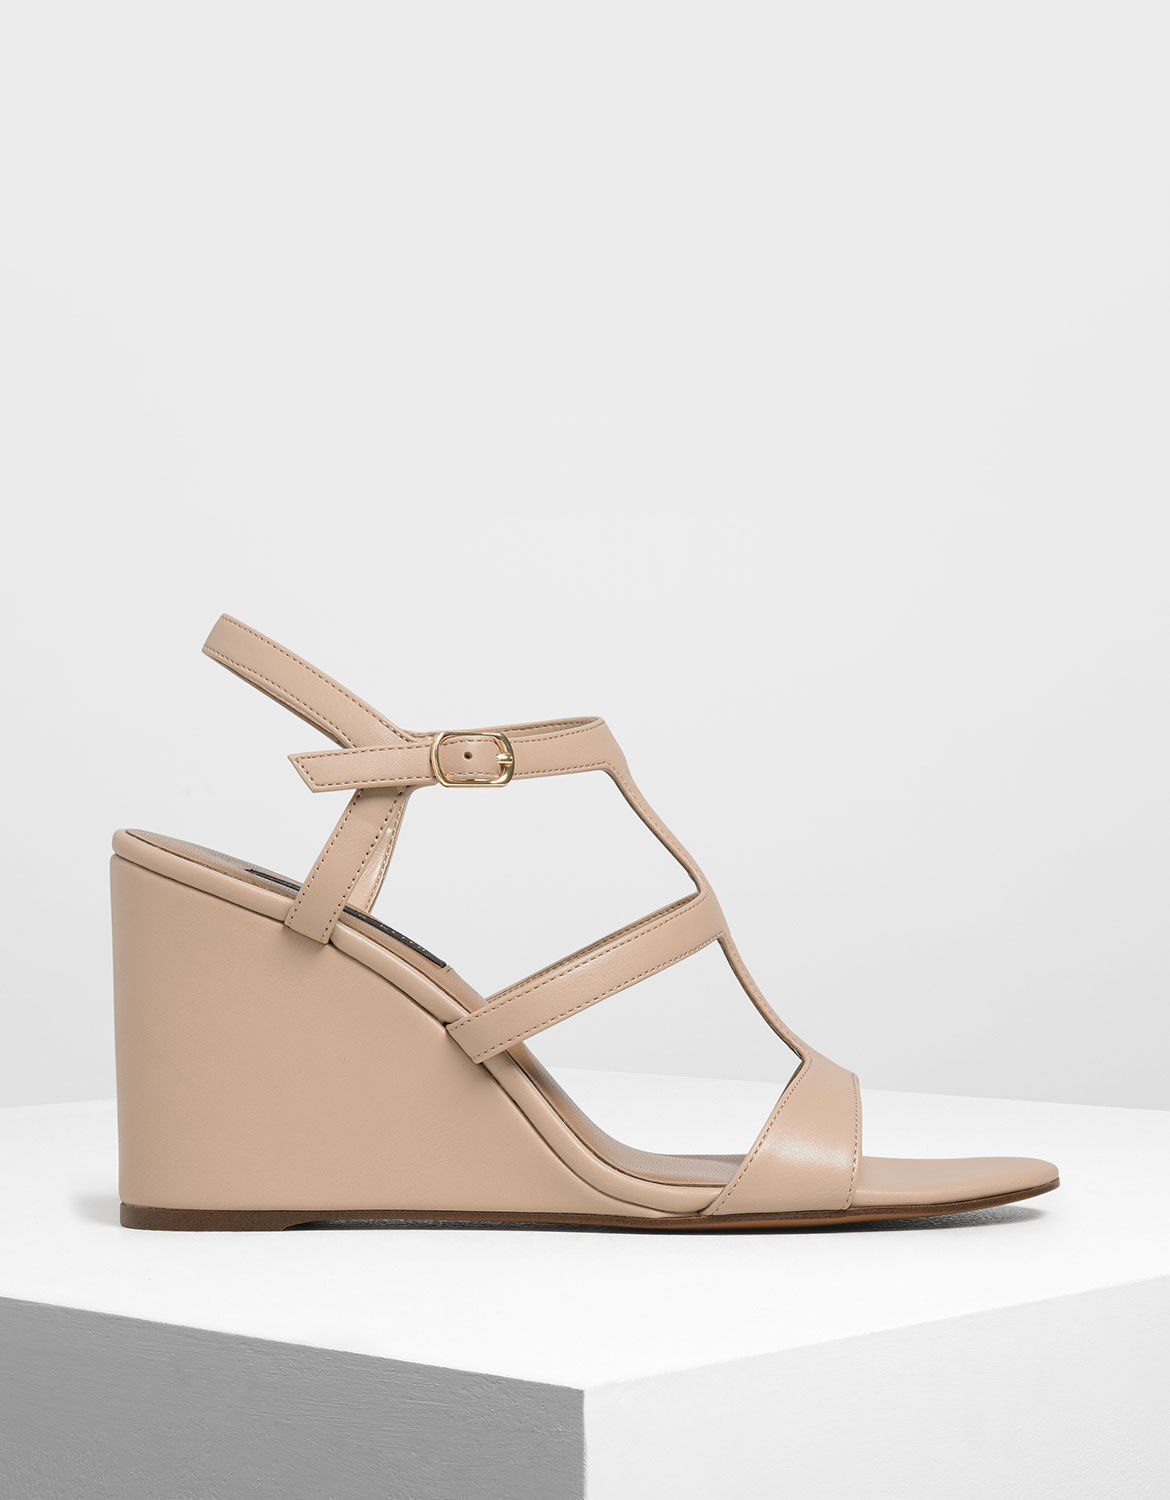 Nude Strappy Wedges | CHARLES \u0026 KEITH KH